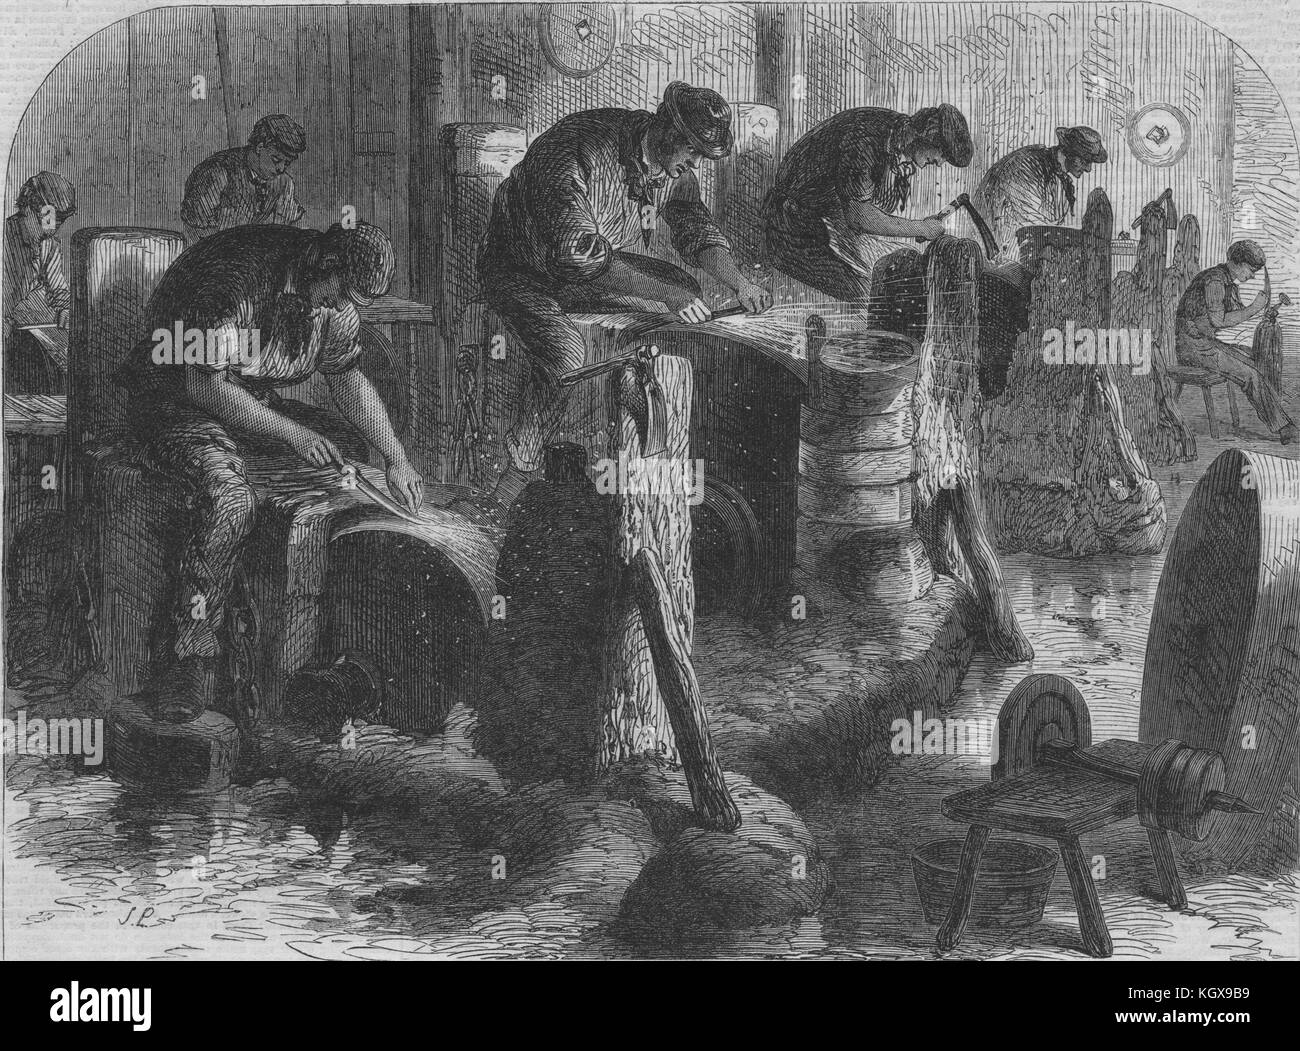 The Sheffield steel manufactures. Table-blade Grinding. Yorkshire 1866. The Illustrated London News Stock Photo